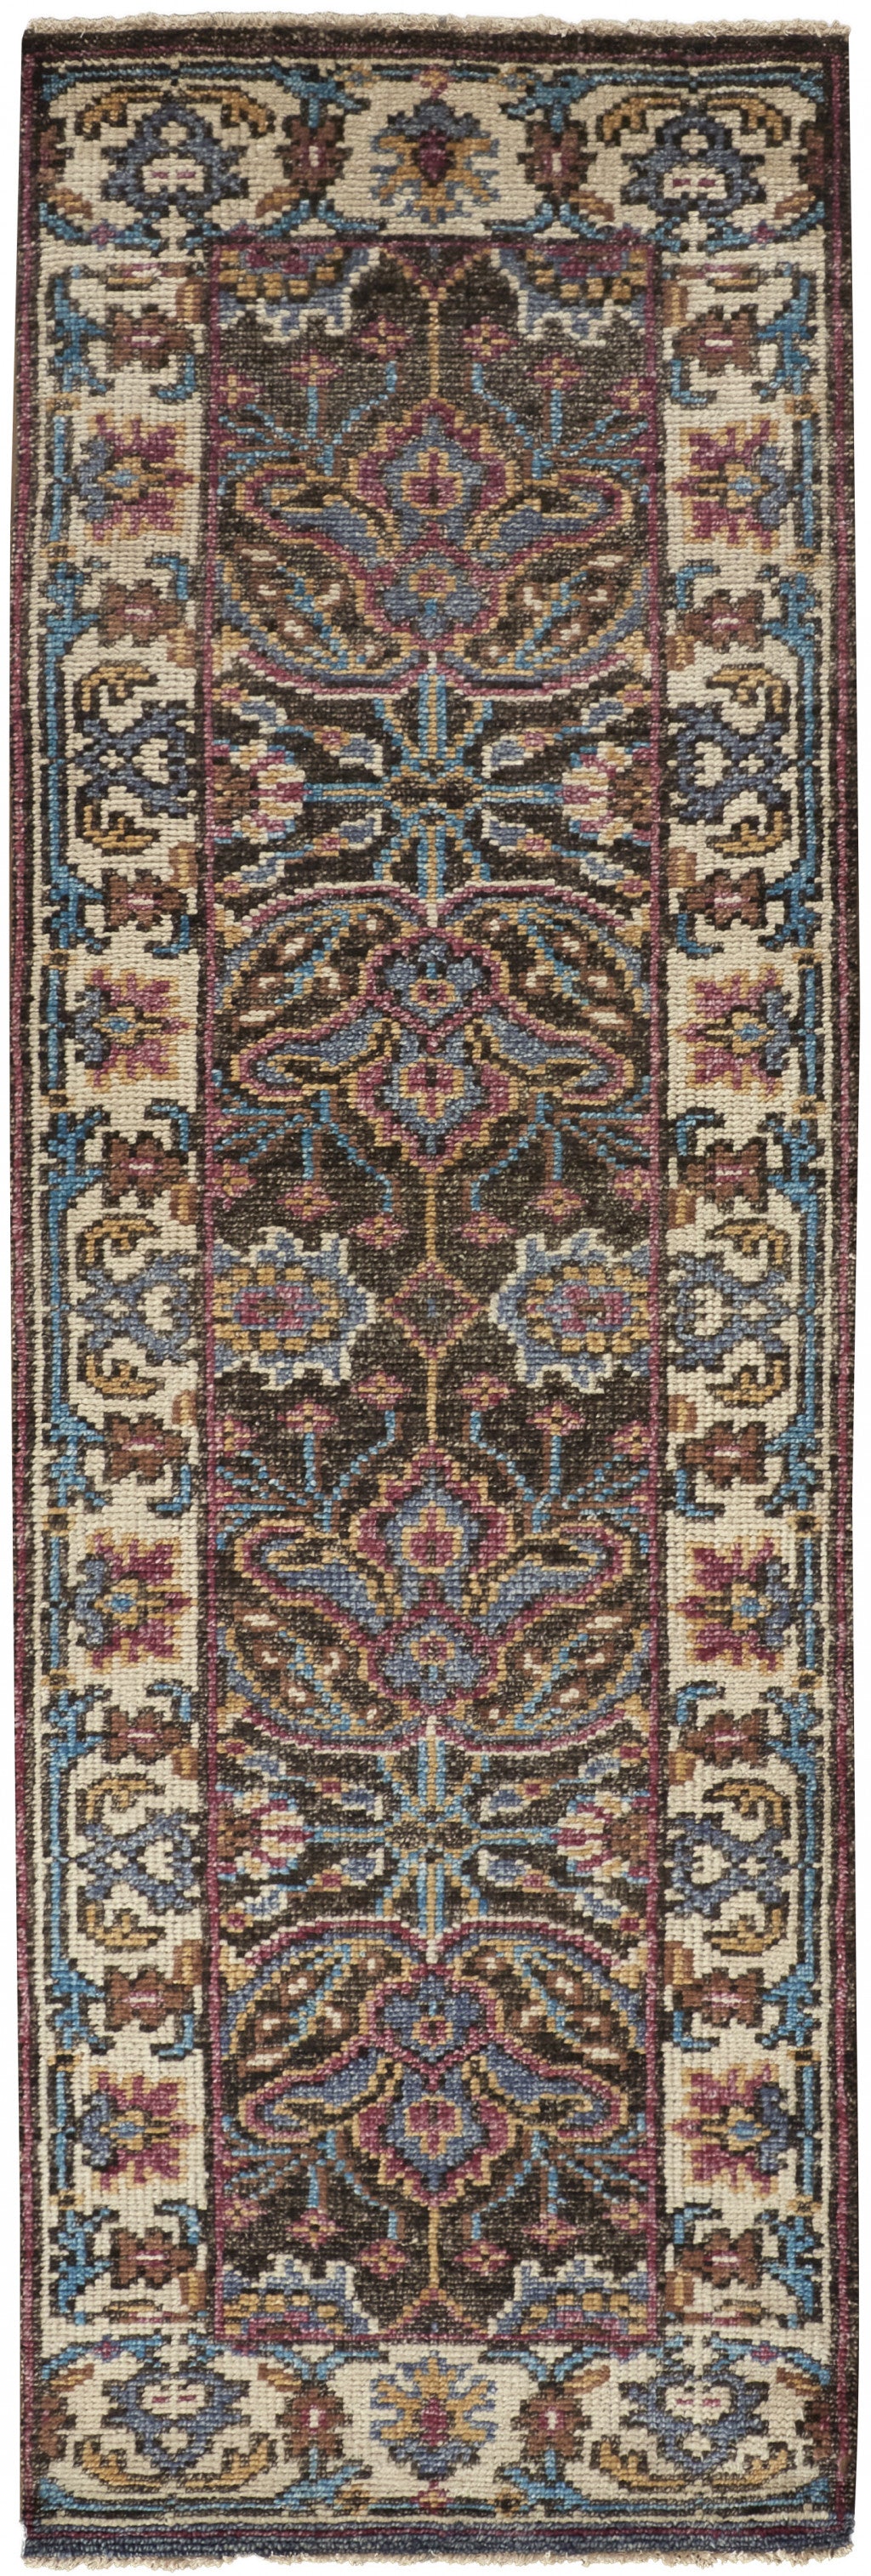 8' Ivory Brown And Blue Wool Floral Hand Knotted Distressed Stain Resistant Runner Rug With Fringe